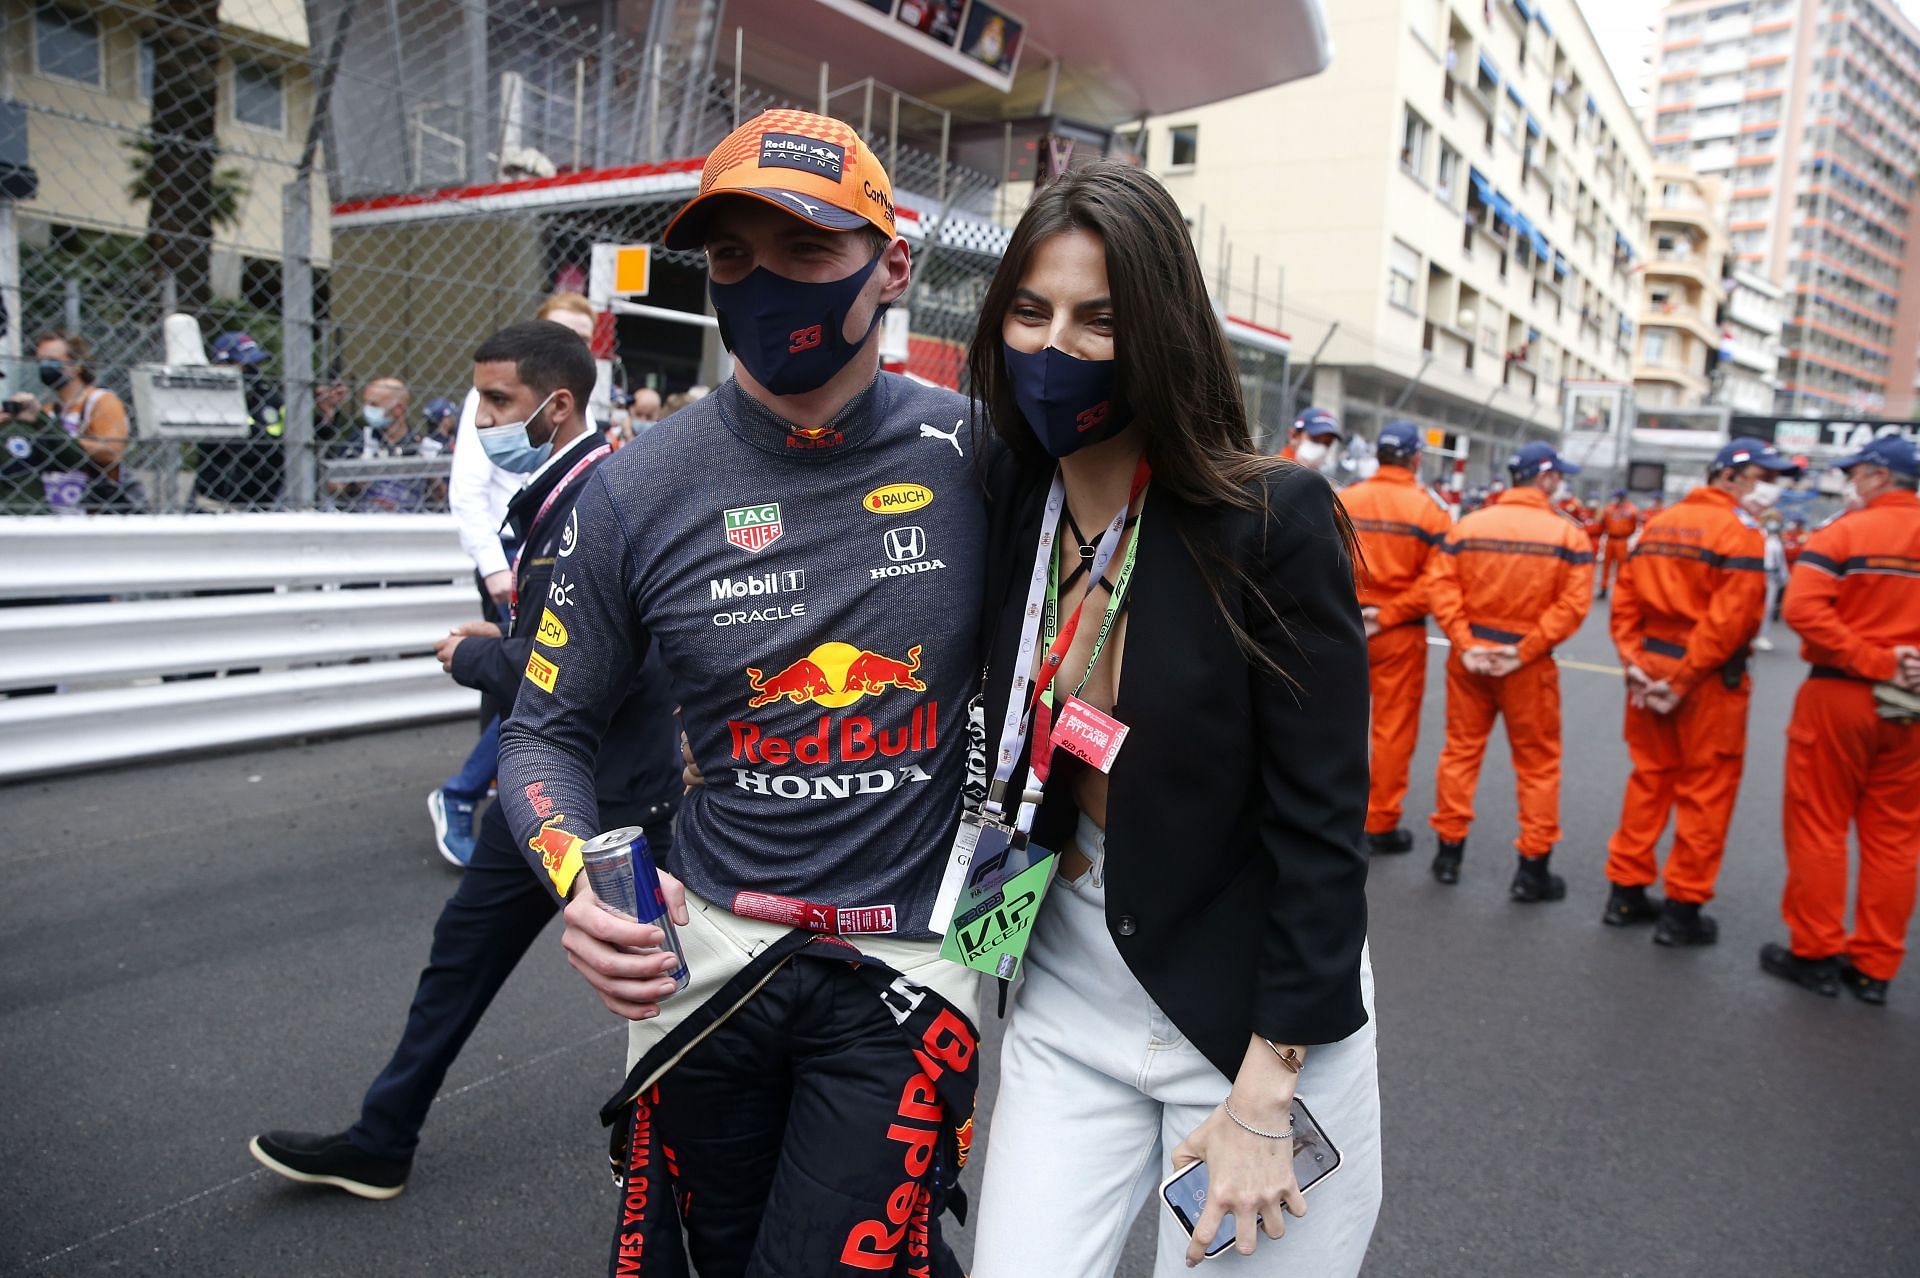 2021 F1 Grand Prix of Monaco - Max Verstappen celebrates his victory with girlfriend Kelly Piquet